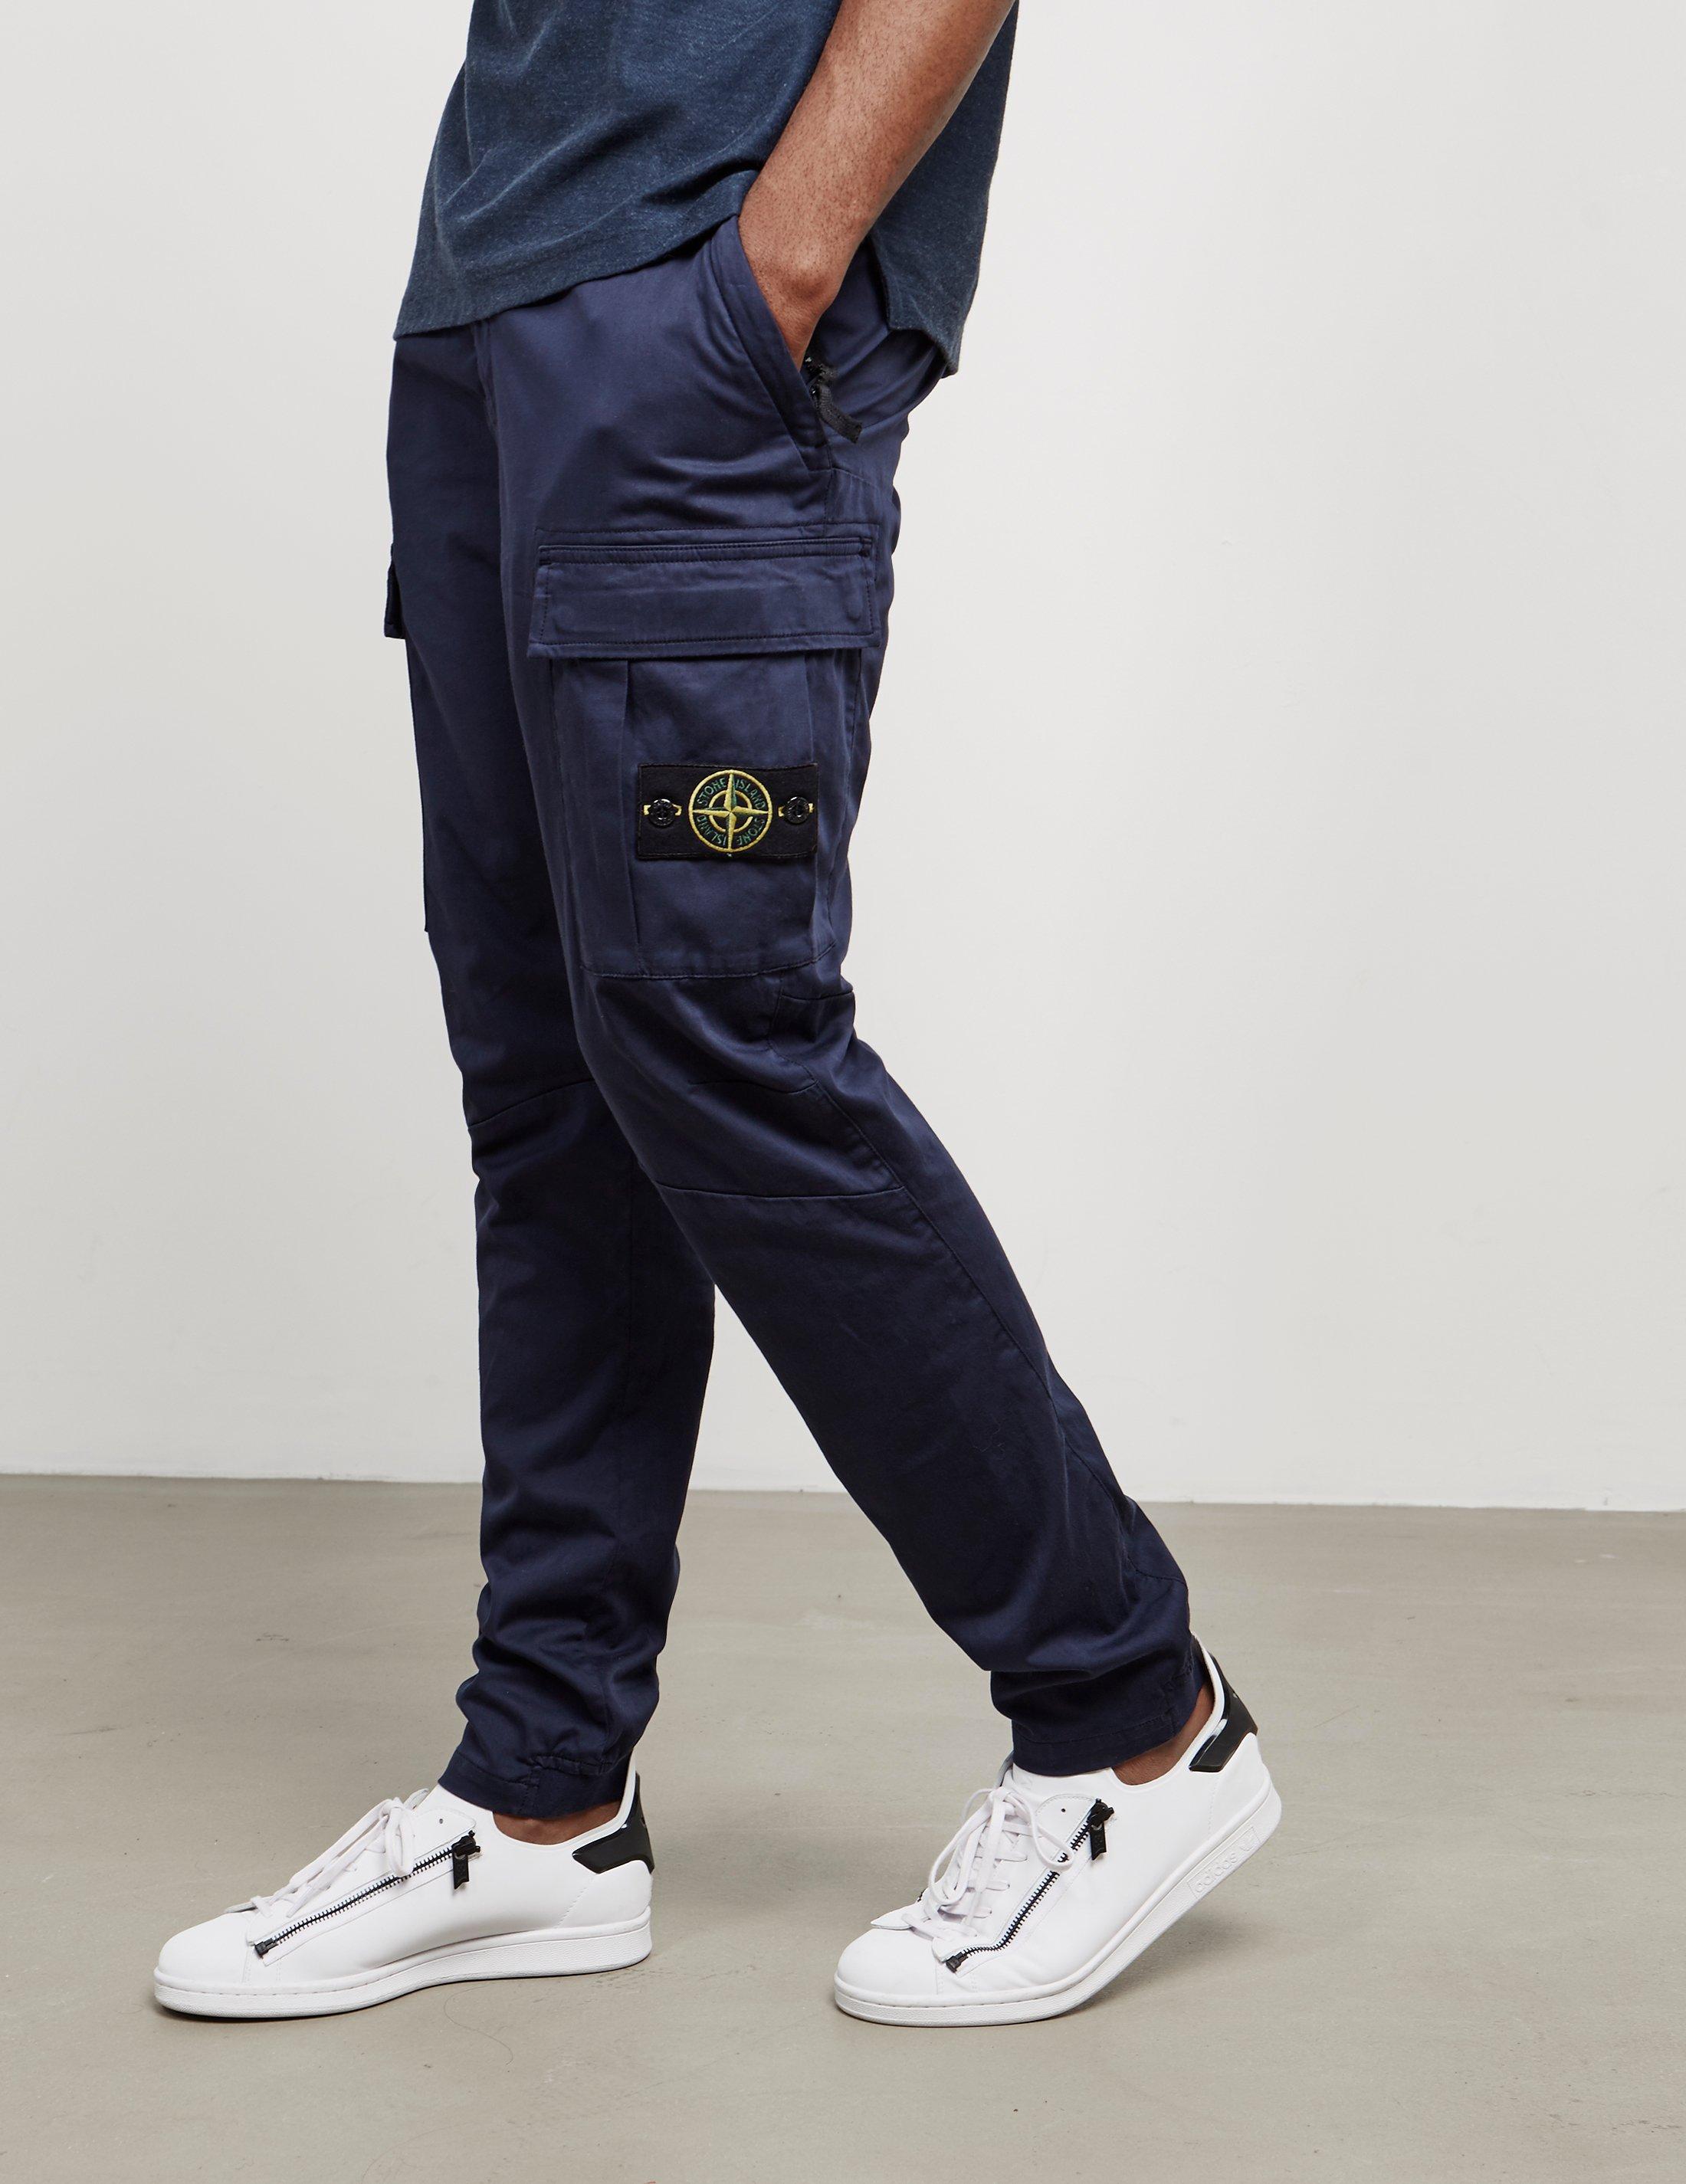 Stone Island 314wa Brushed Canvas Military Cargo Pants in Navy 